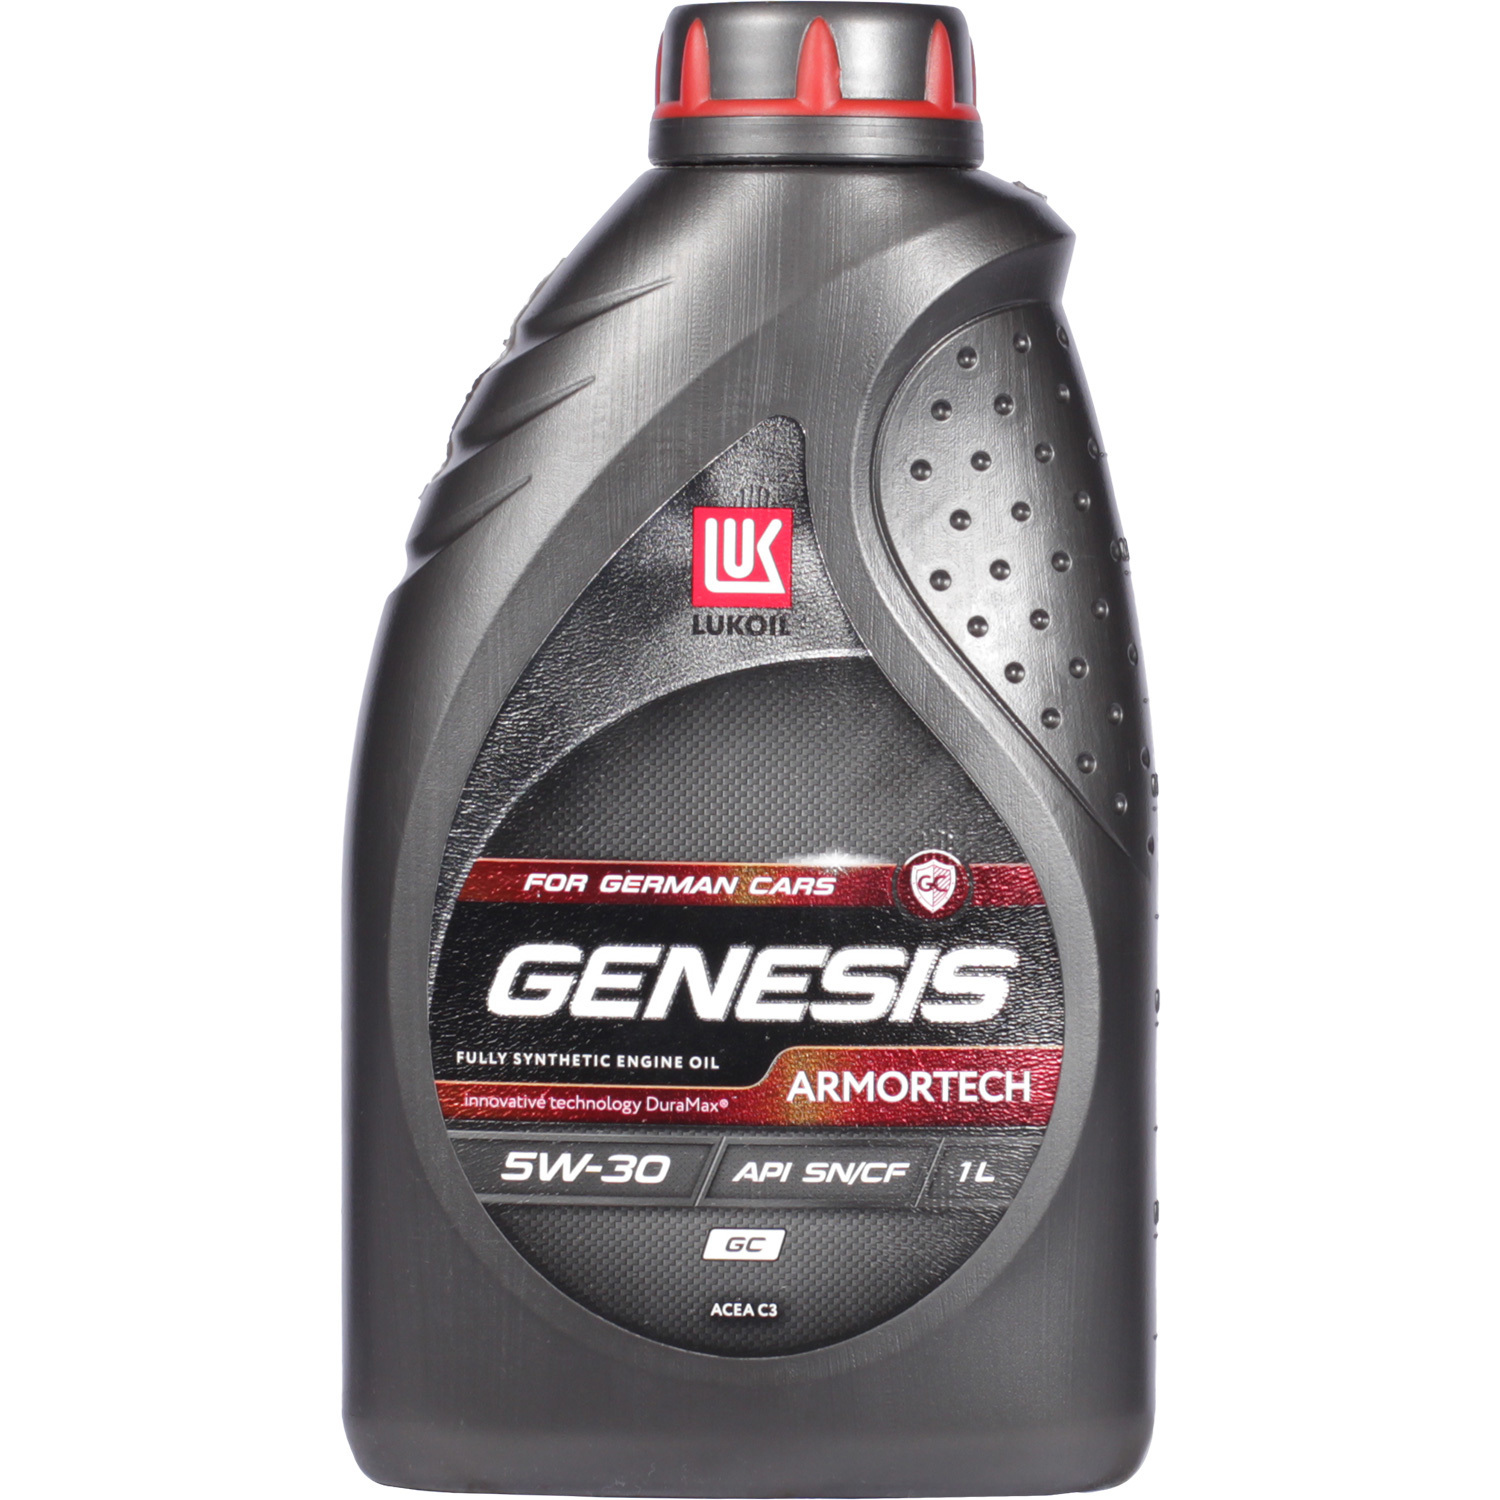 Lukoil Моторное масло Lukoil Genesis Armortech GC 5W-30, 1 л lukoil моторное масло lukoil genesis armortech gc 0w 20 1 л